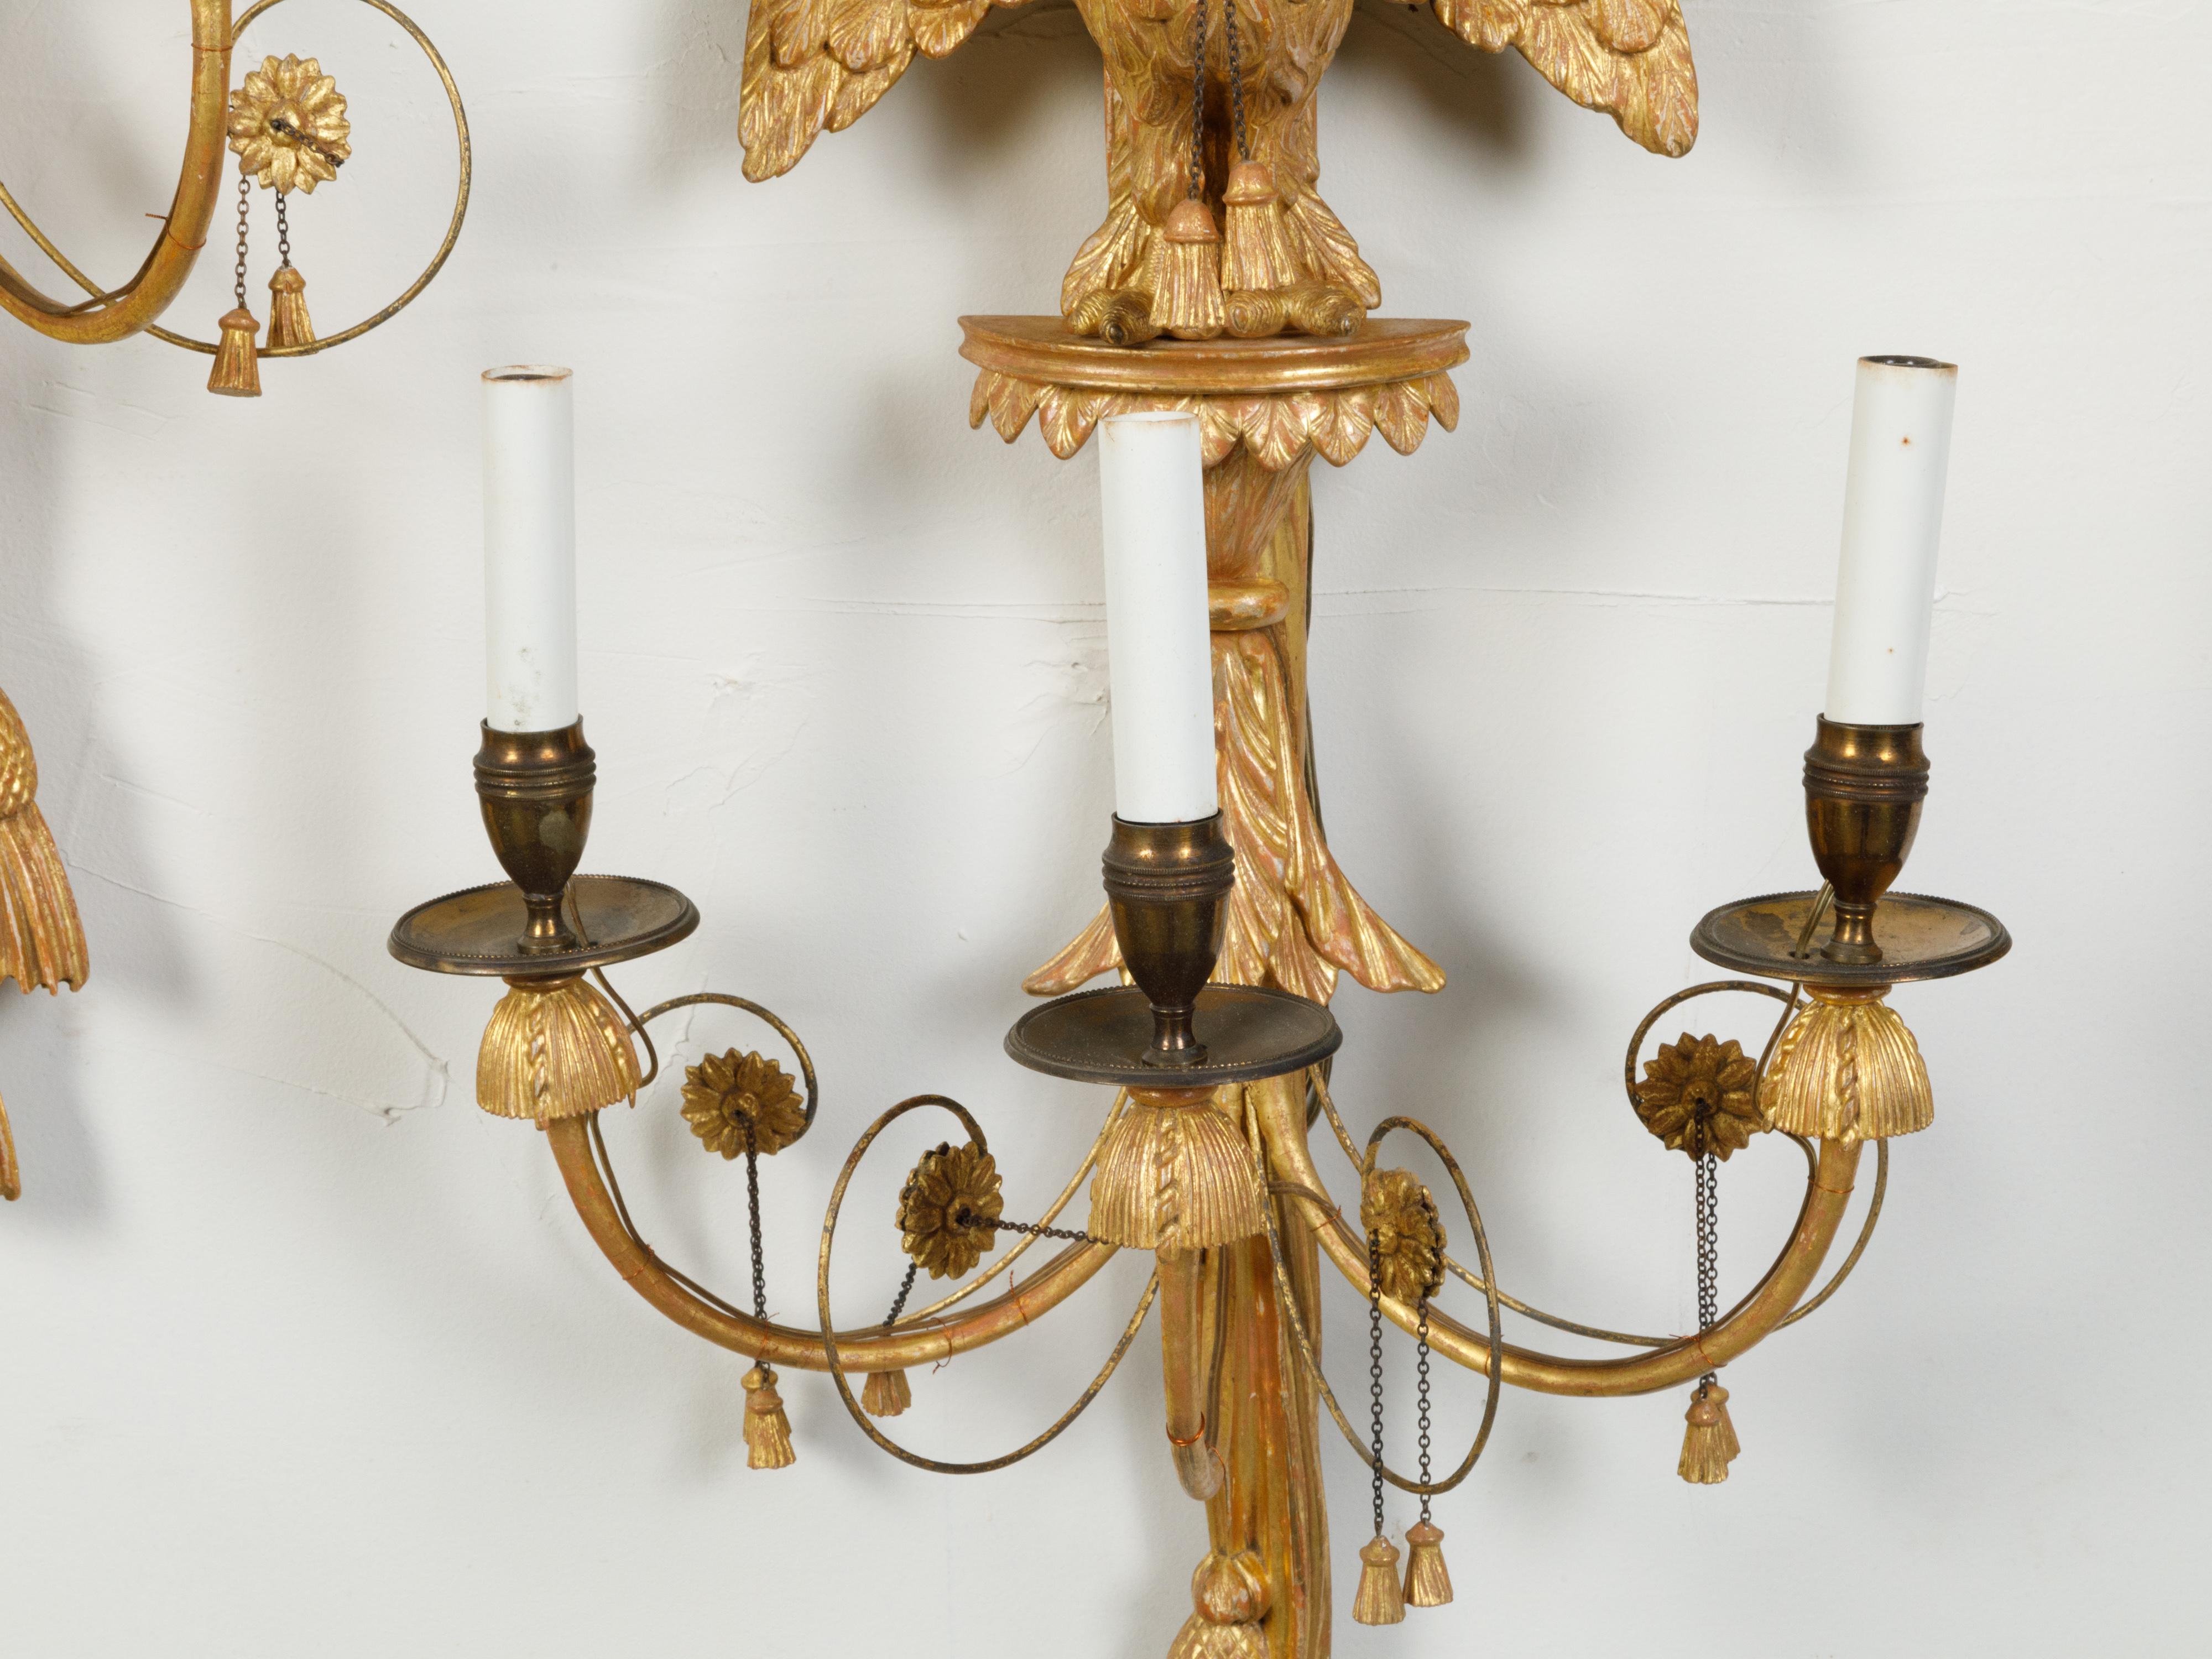 Pair of English 19th Century Three-Light Giltwood Sconces with Carved Eagles For Sale 2